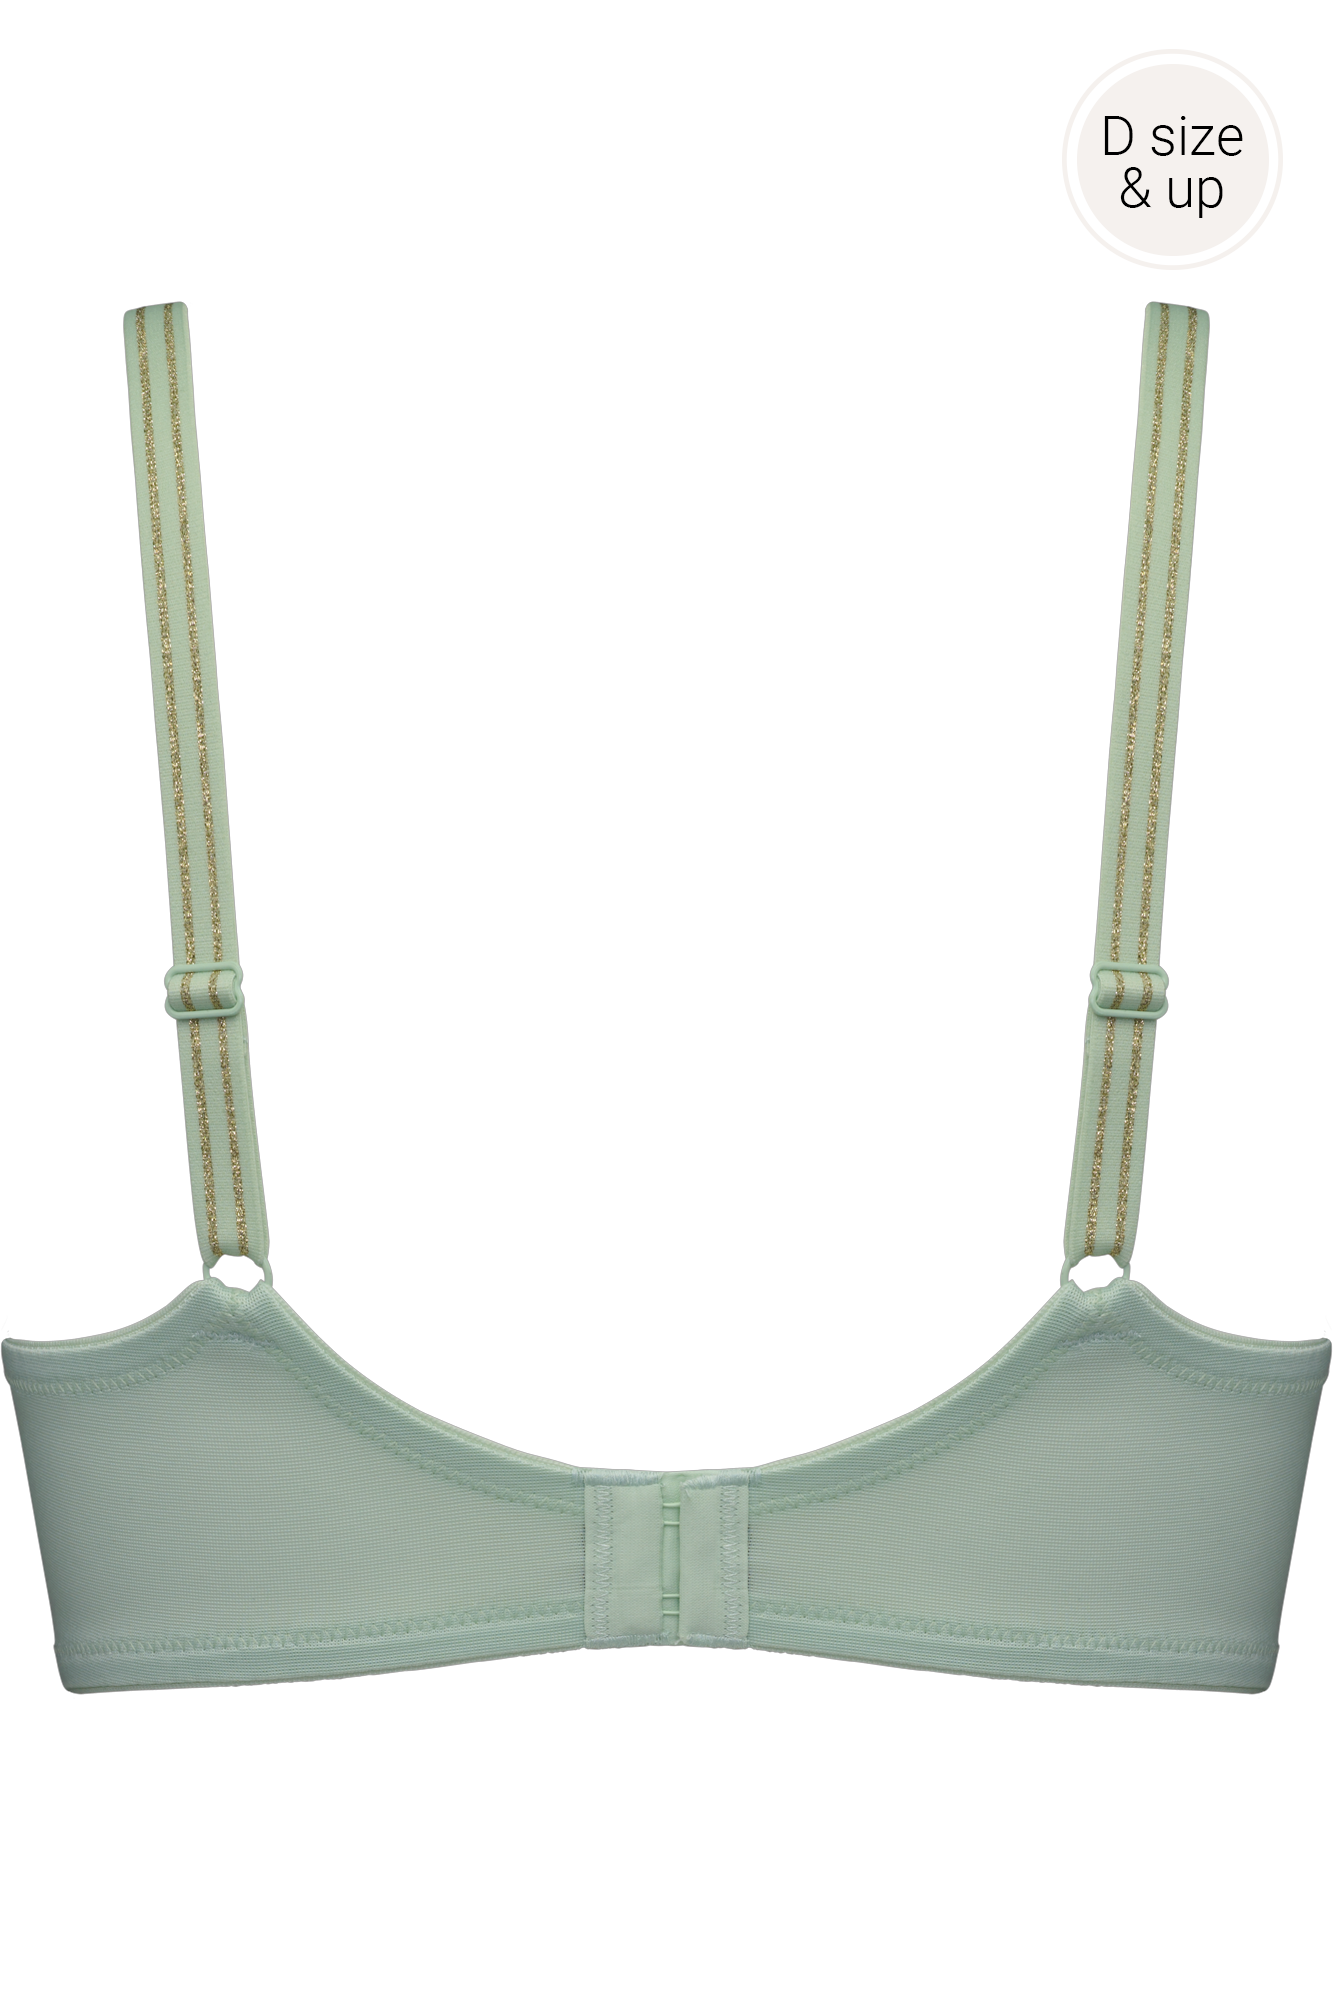 Marlies Dekkers lucky clover balconette bh wired padded green clover and gold